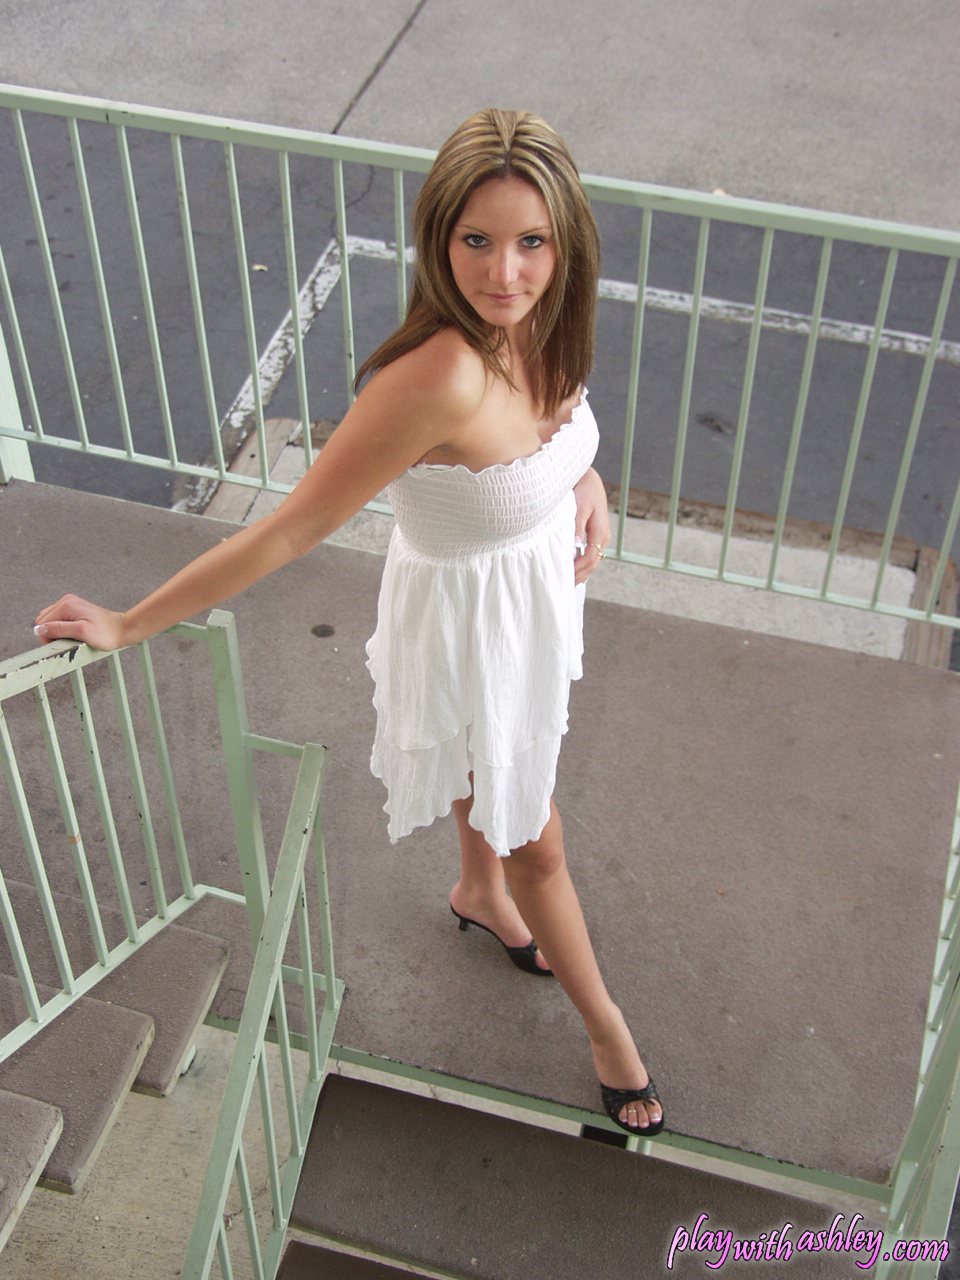 Babe in a white dress